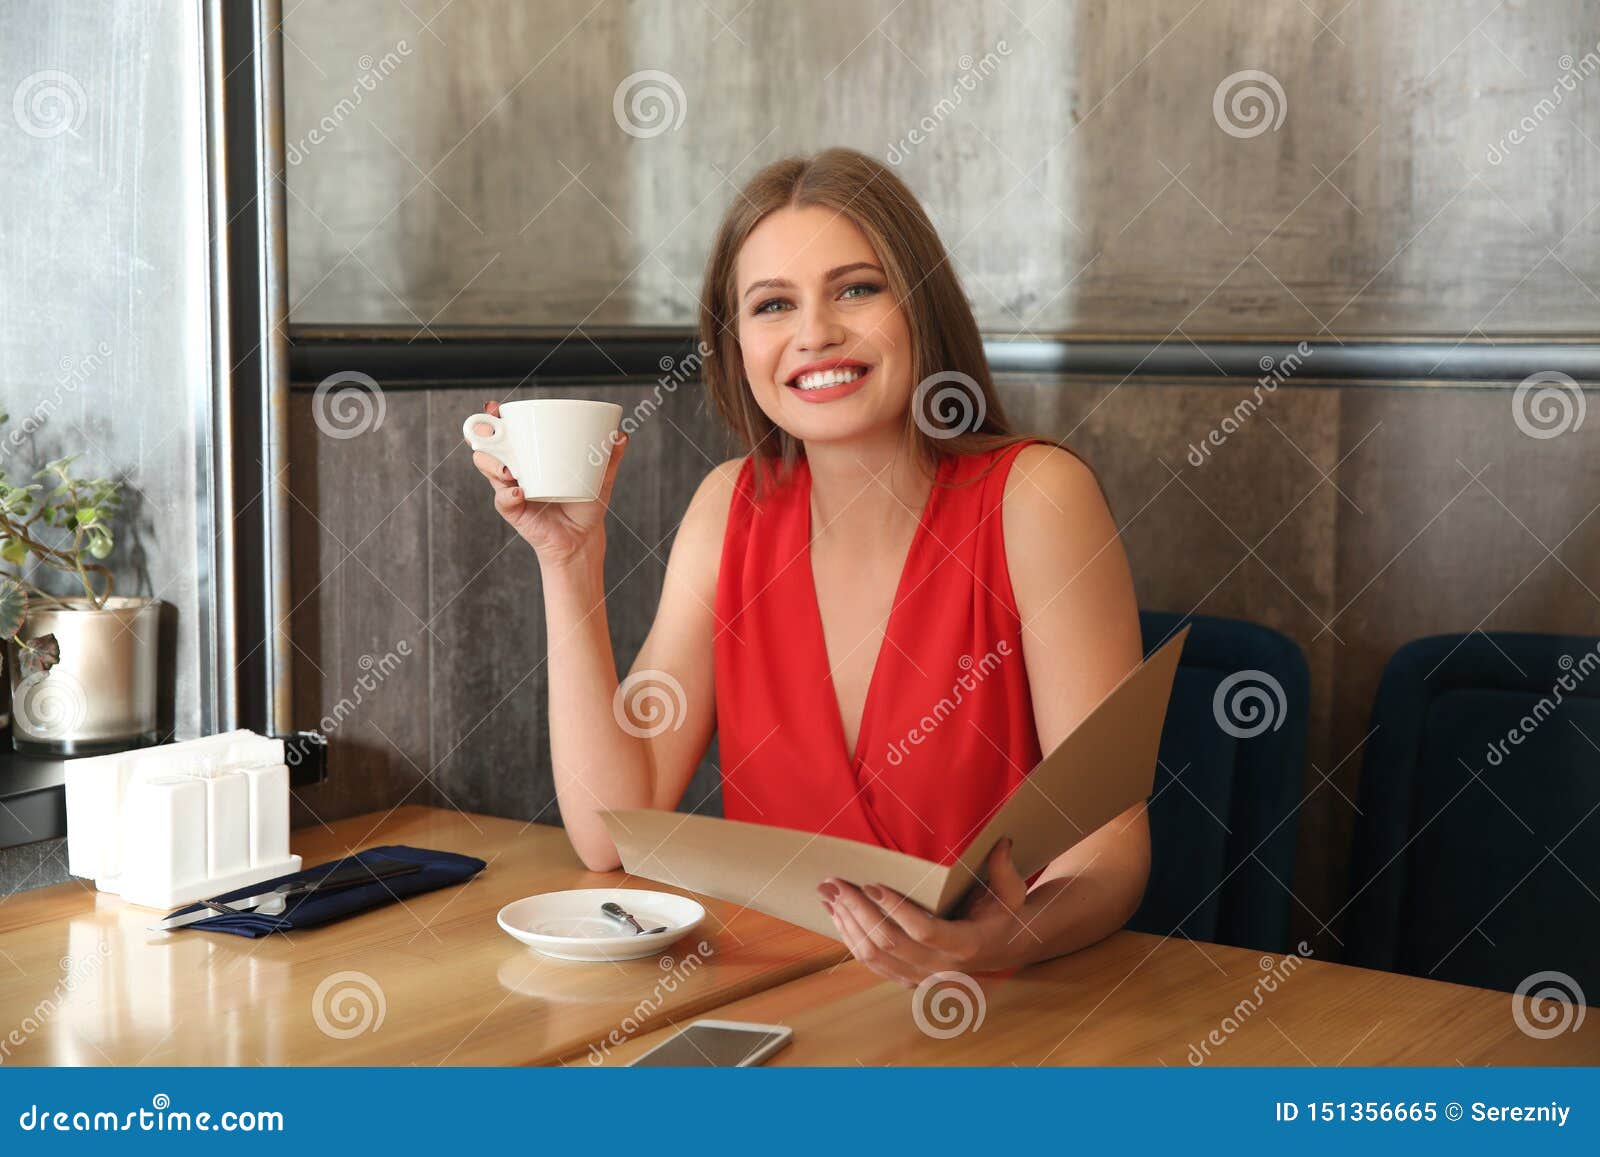 Young Woman With Menu Sitting In Restaurant Stock Image Image Of